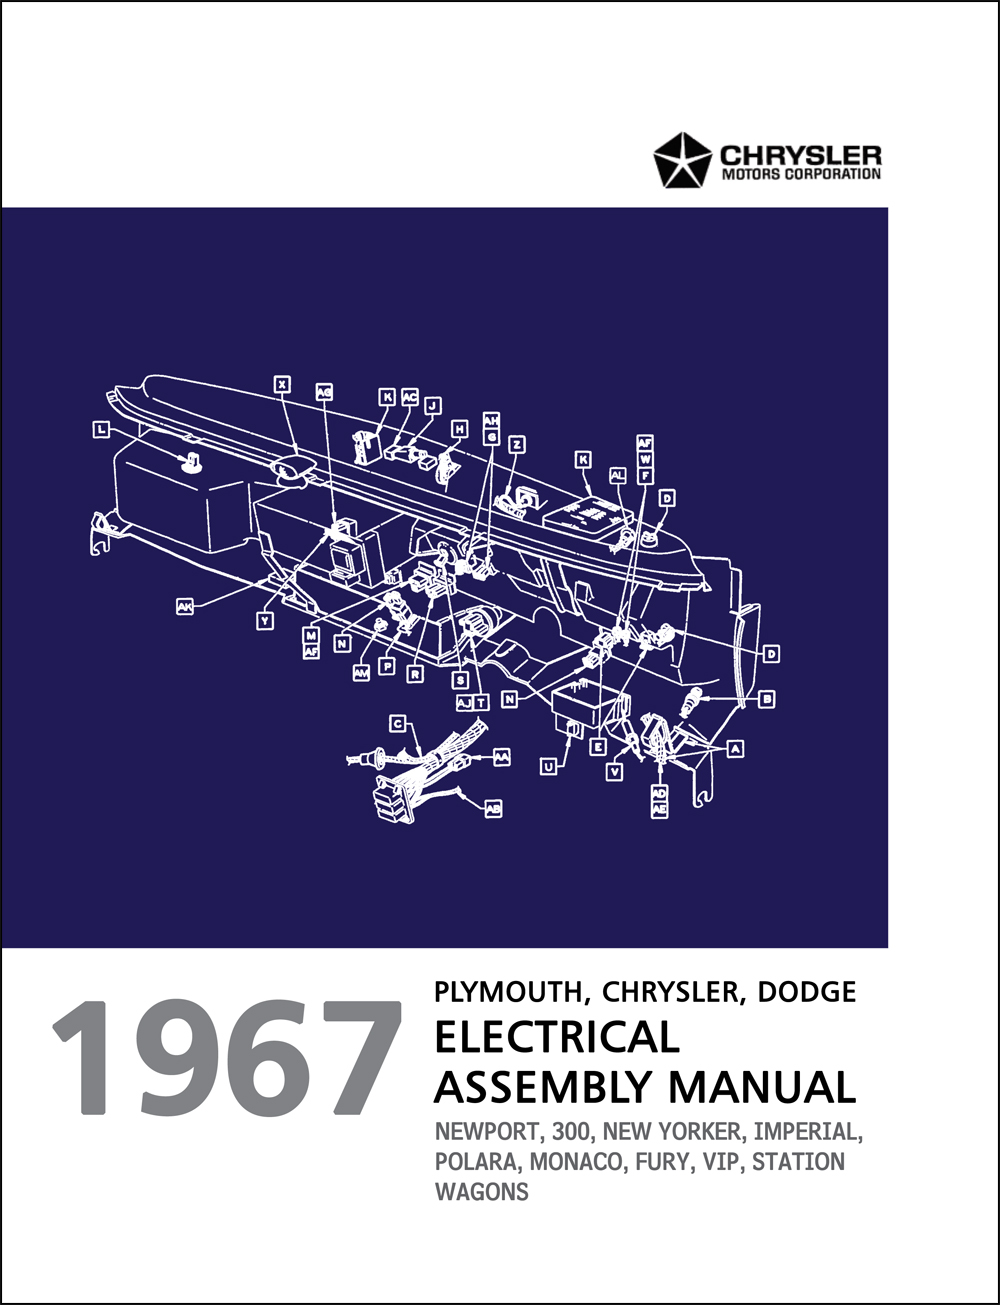 1967 Chrysler, Dodge, and Plymouth Big Car Electrical Assembly Manual Reprint